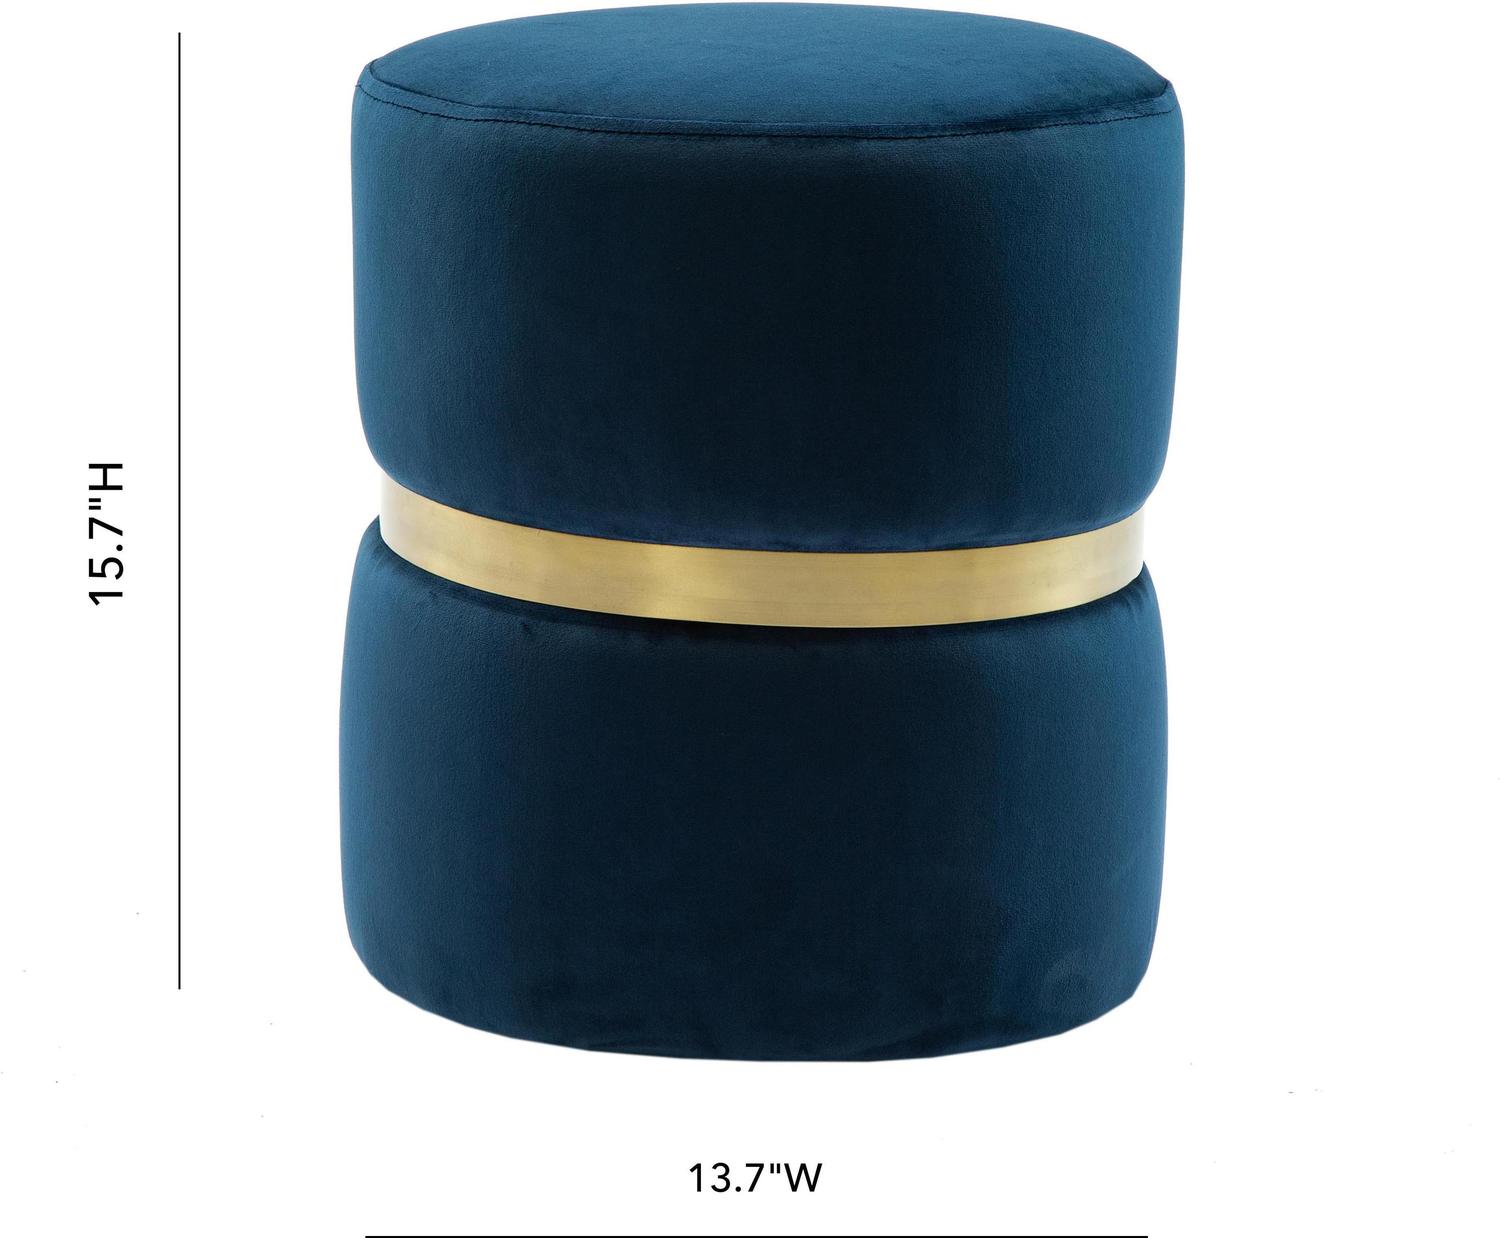 cushioned storage bench with back Tov Furniture Ottomans Navy